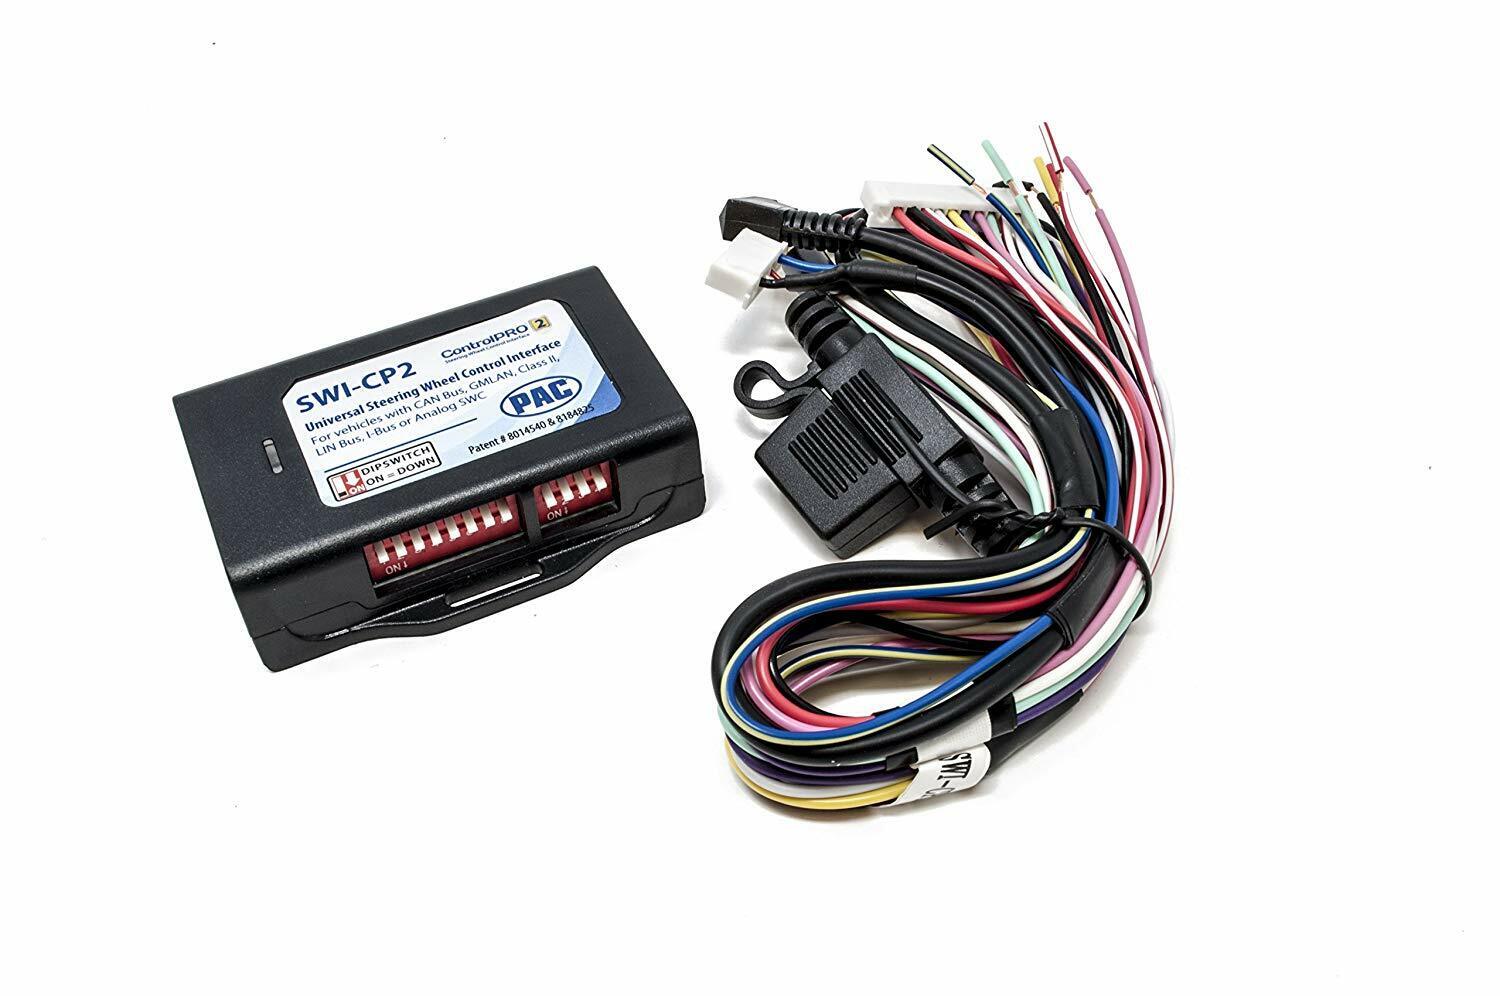 PAC SWI-CP2 Steering Wheel Interface for Select Aftermarket Car Stereo Receivers